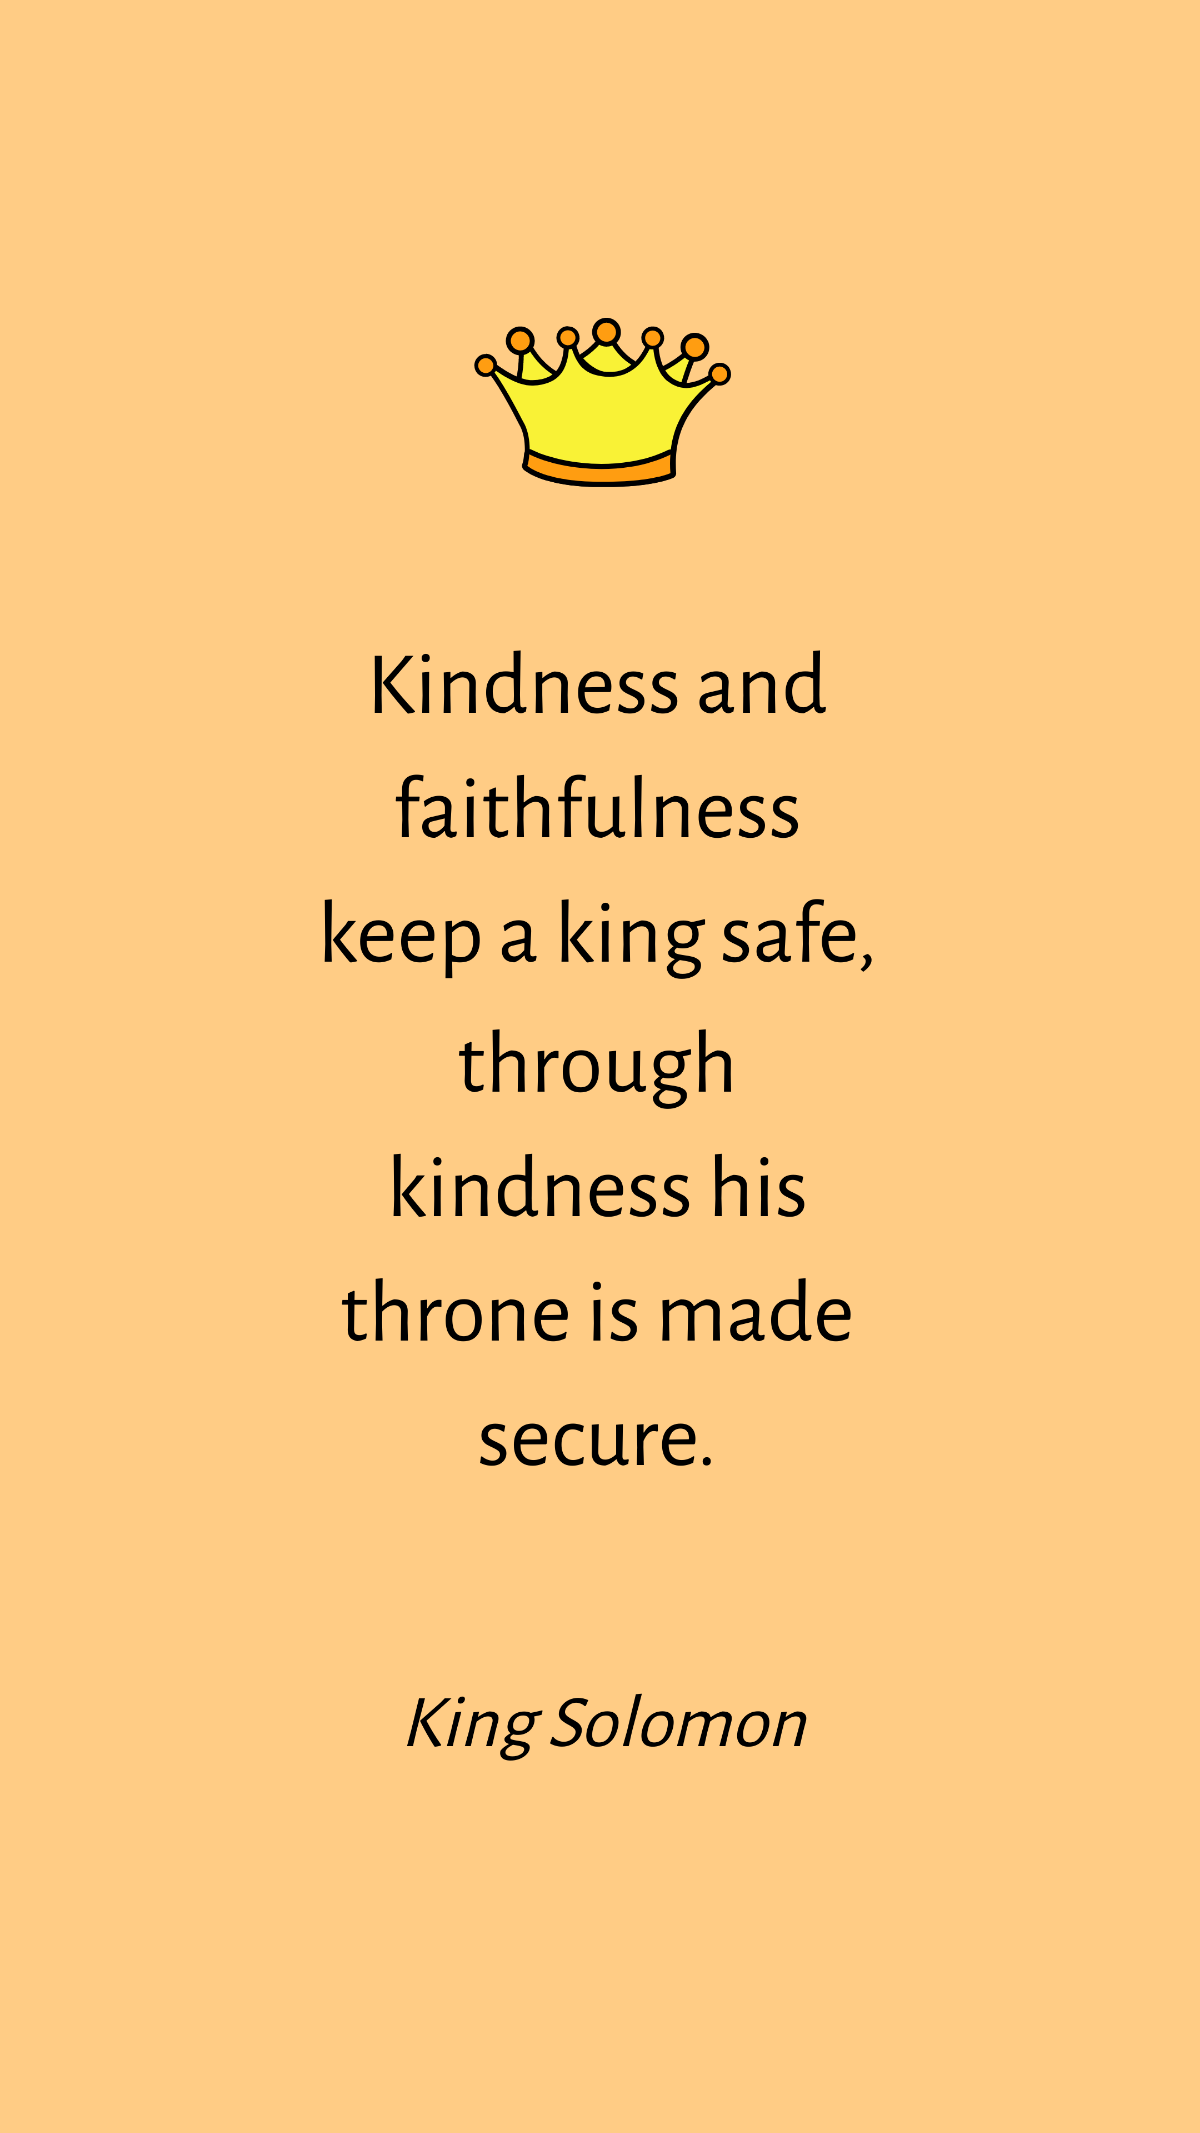 King Solomon - Kindness and faithfulness keep a king safe, through kindness his throne is made secure.